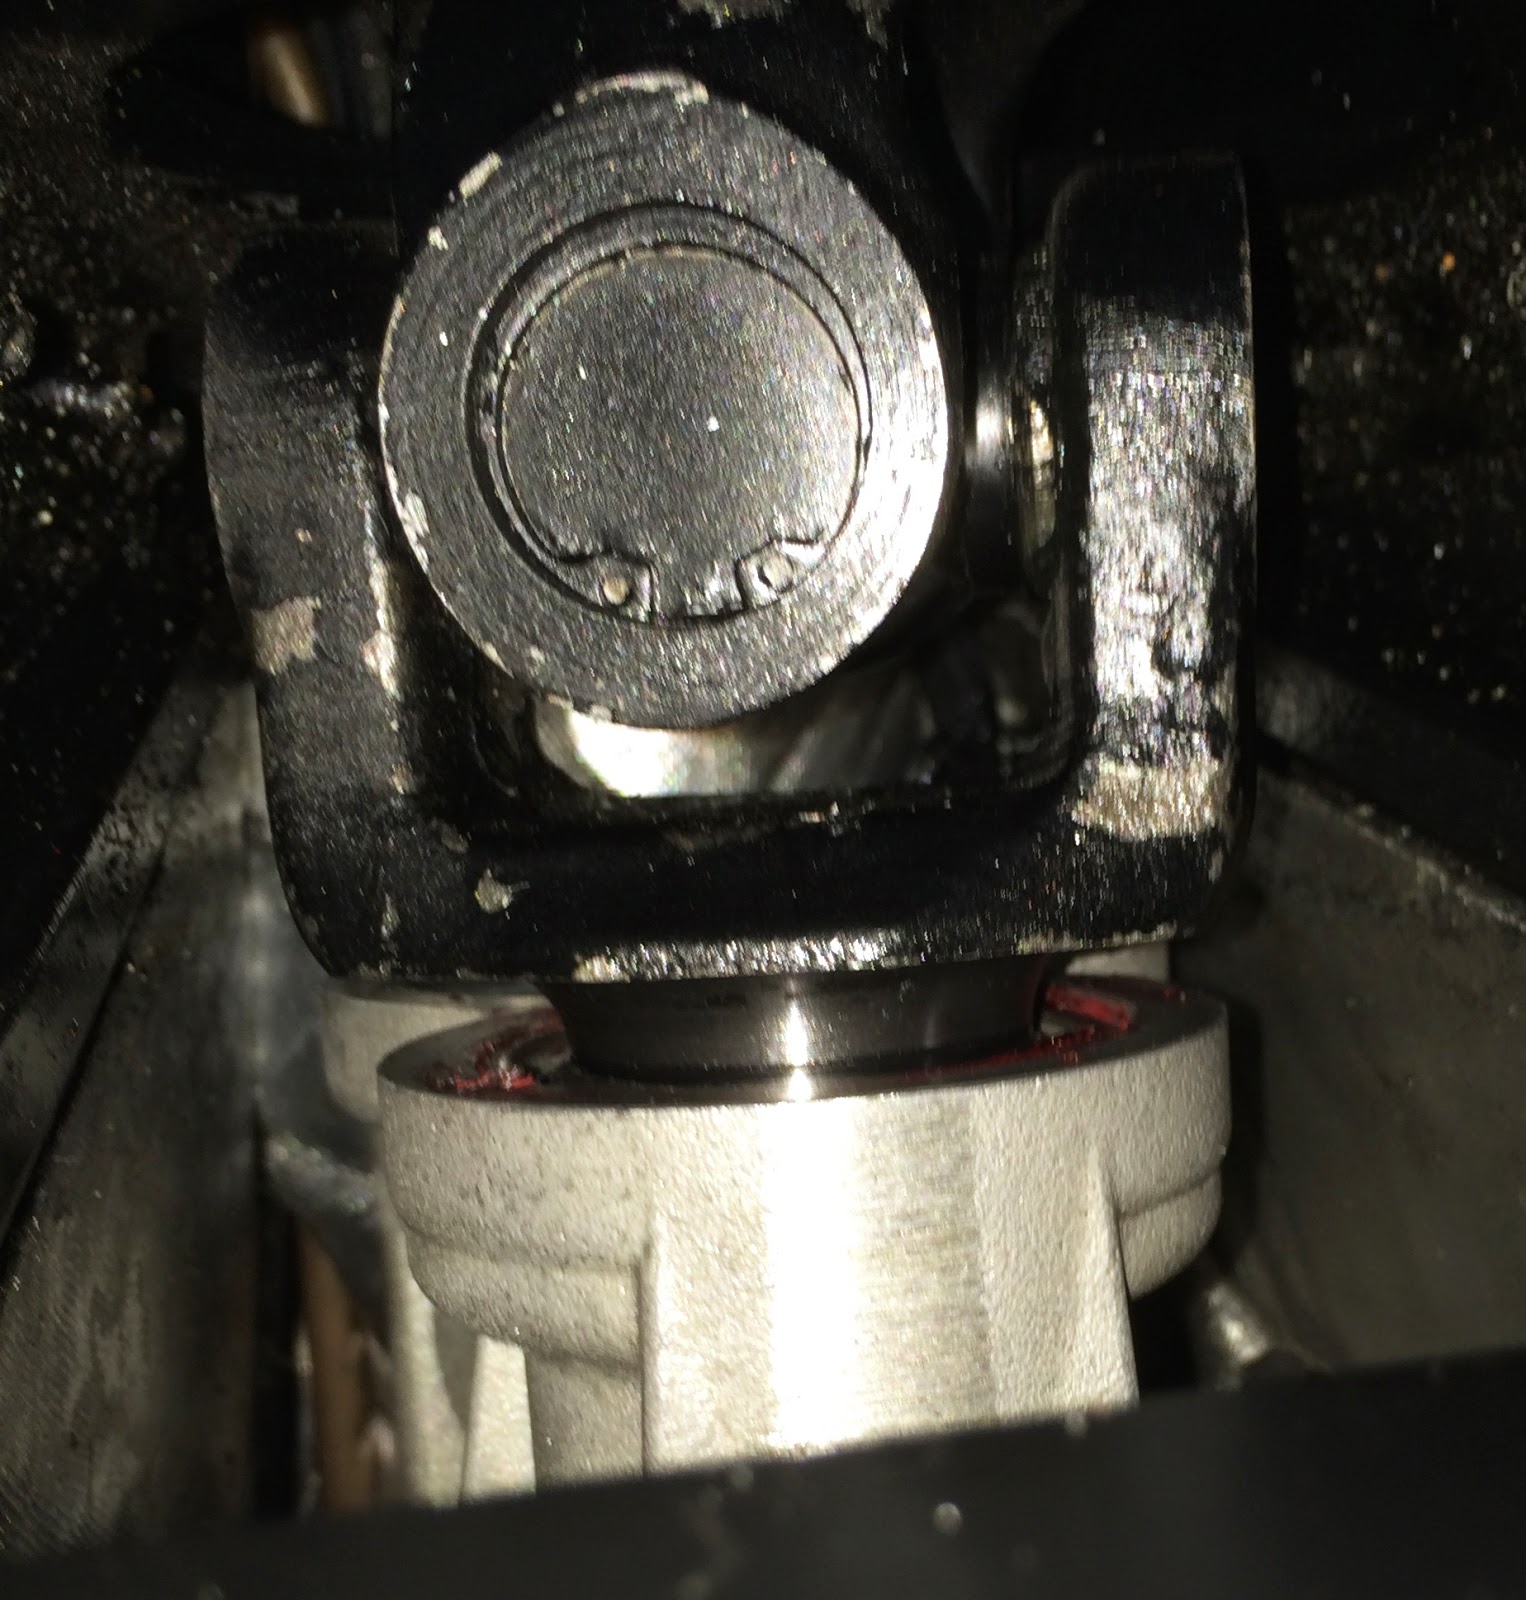 Propshaft in gearbox with no leaking fluids.